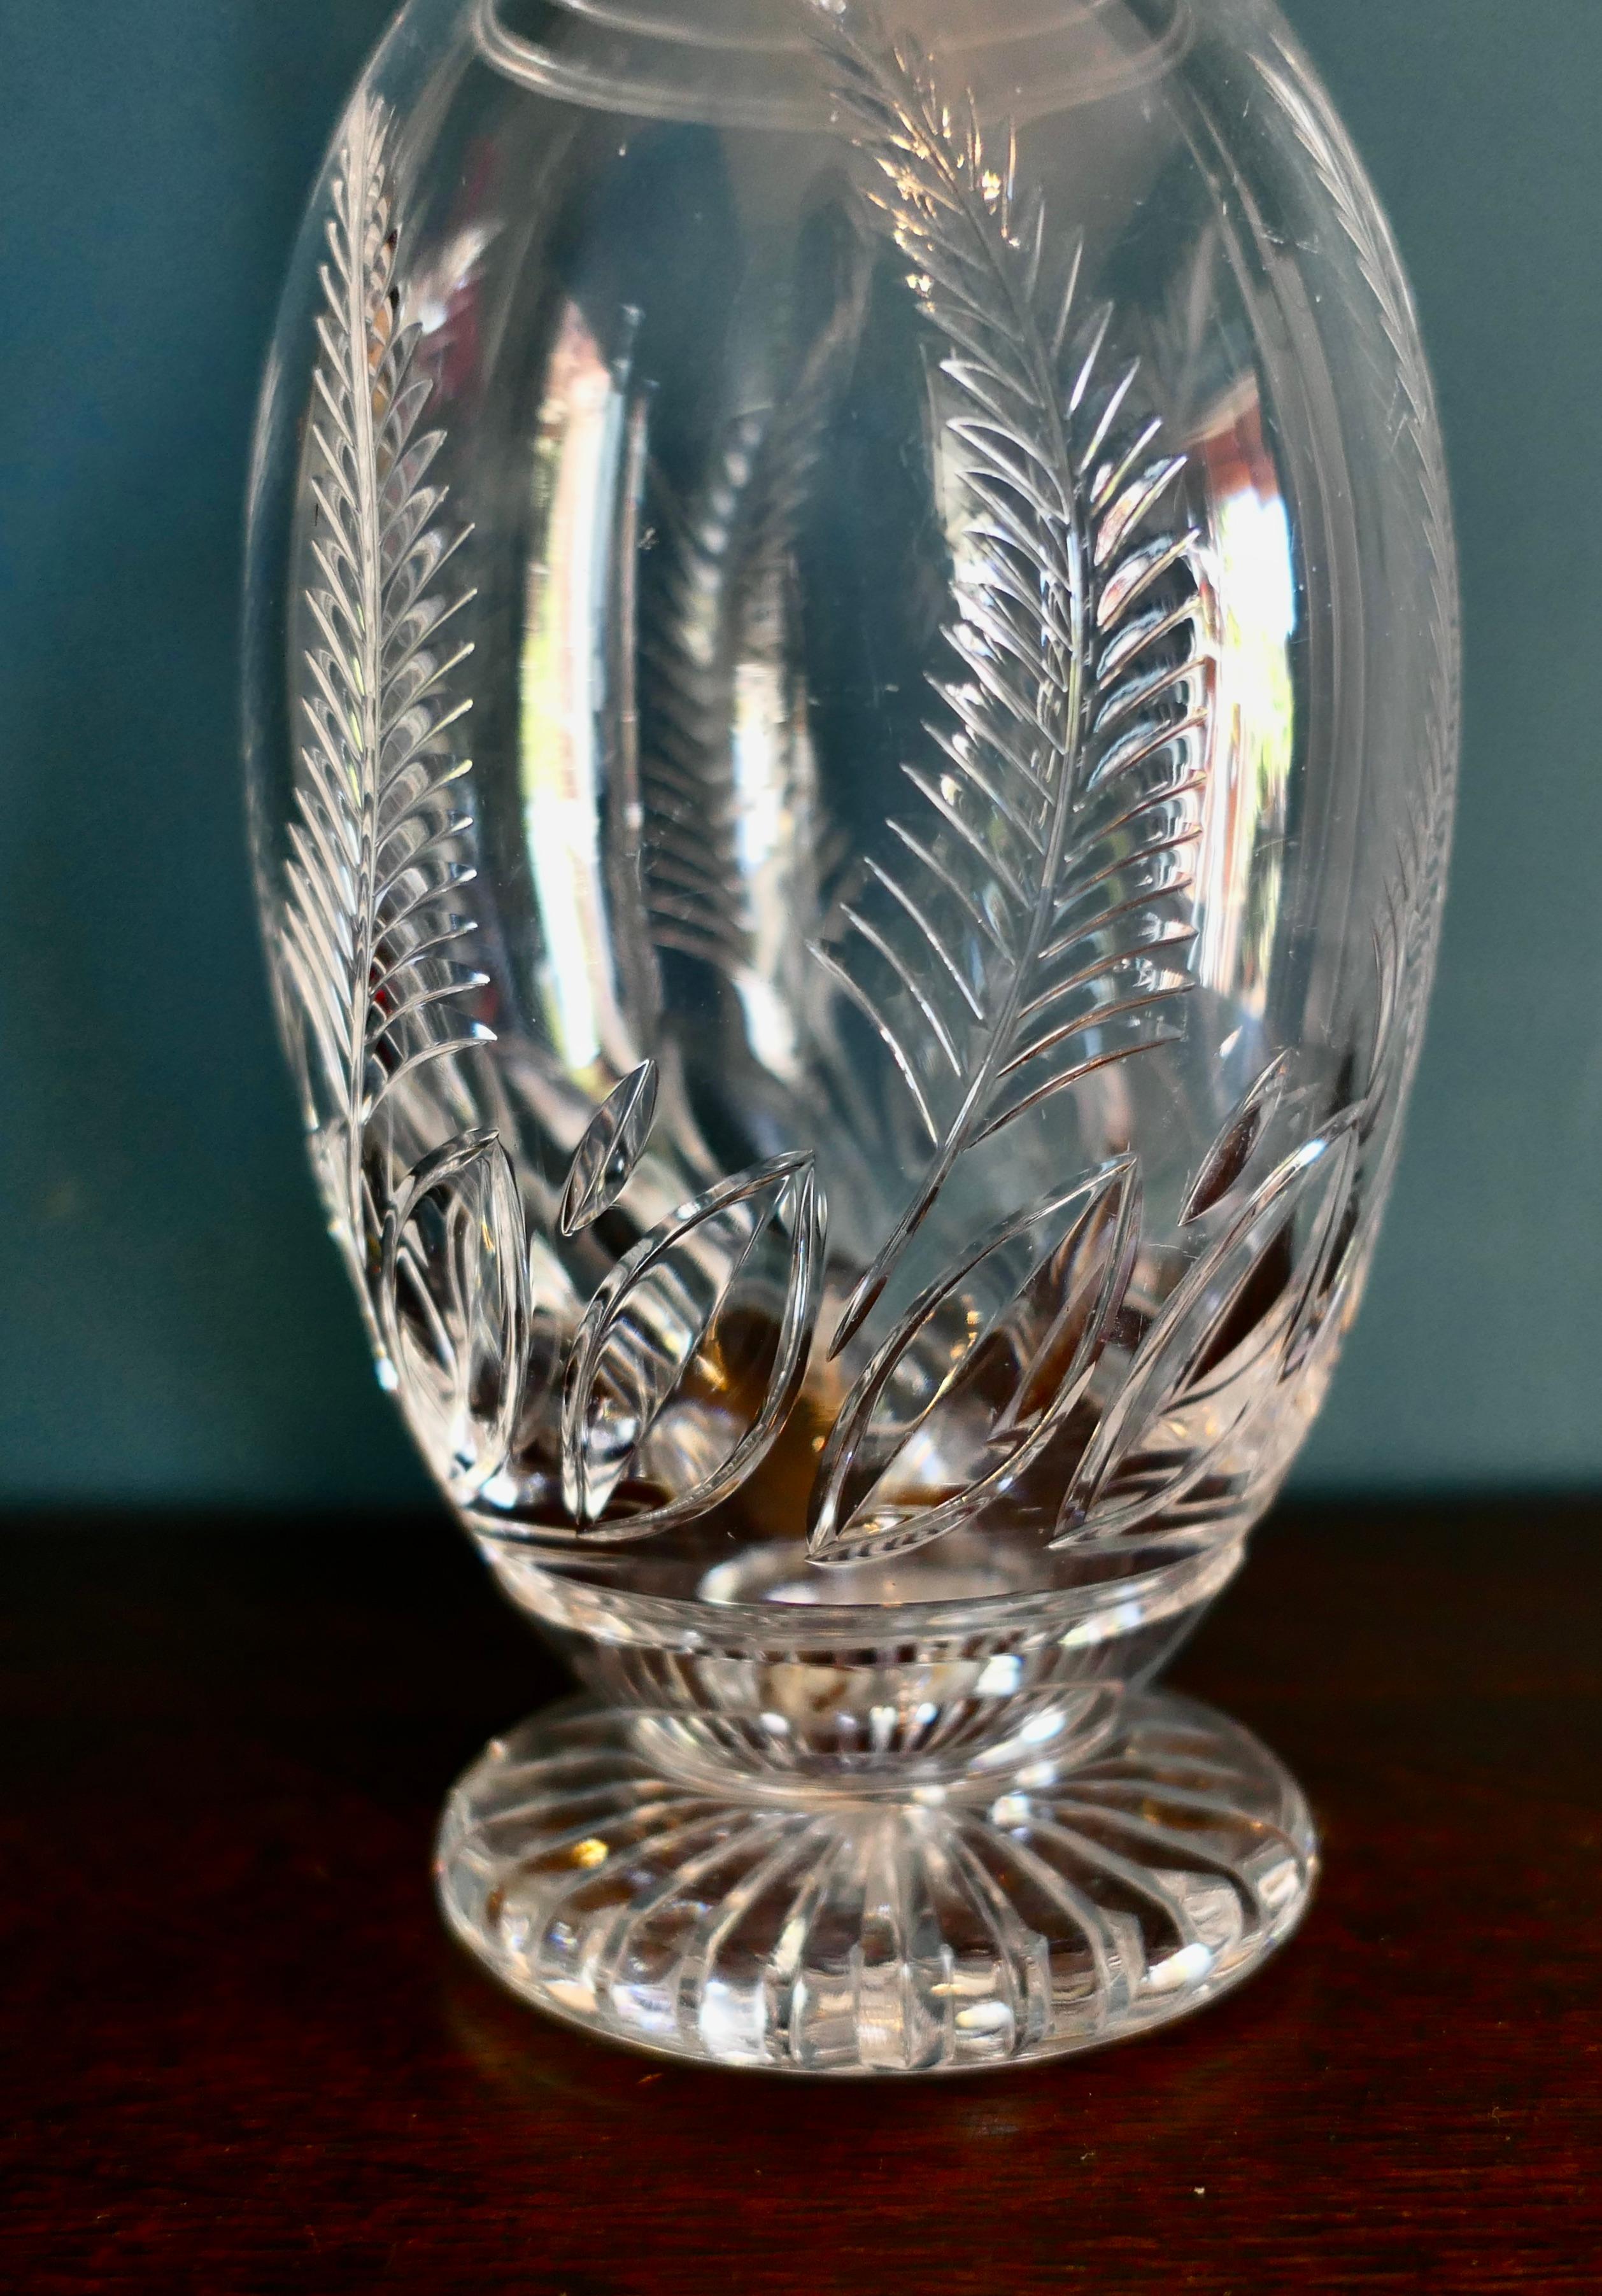 Stuart crystal round footed decanter Ellesmere pattern.

A Classic of its time the lovely piece is in good condition, and one of the loveliest of The Stuart designs dating from the middle of the 20th century.
The item is signed 